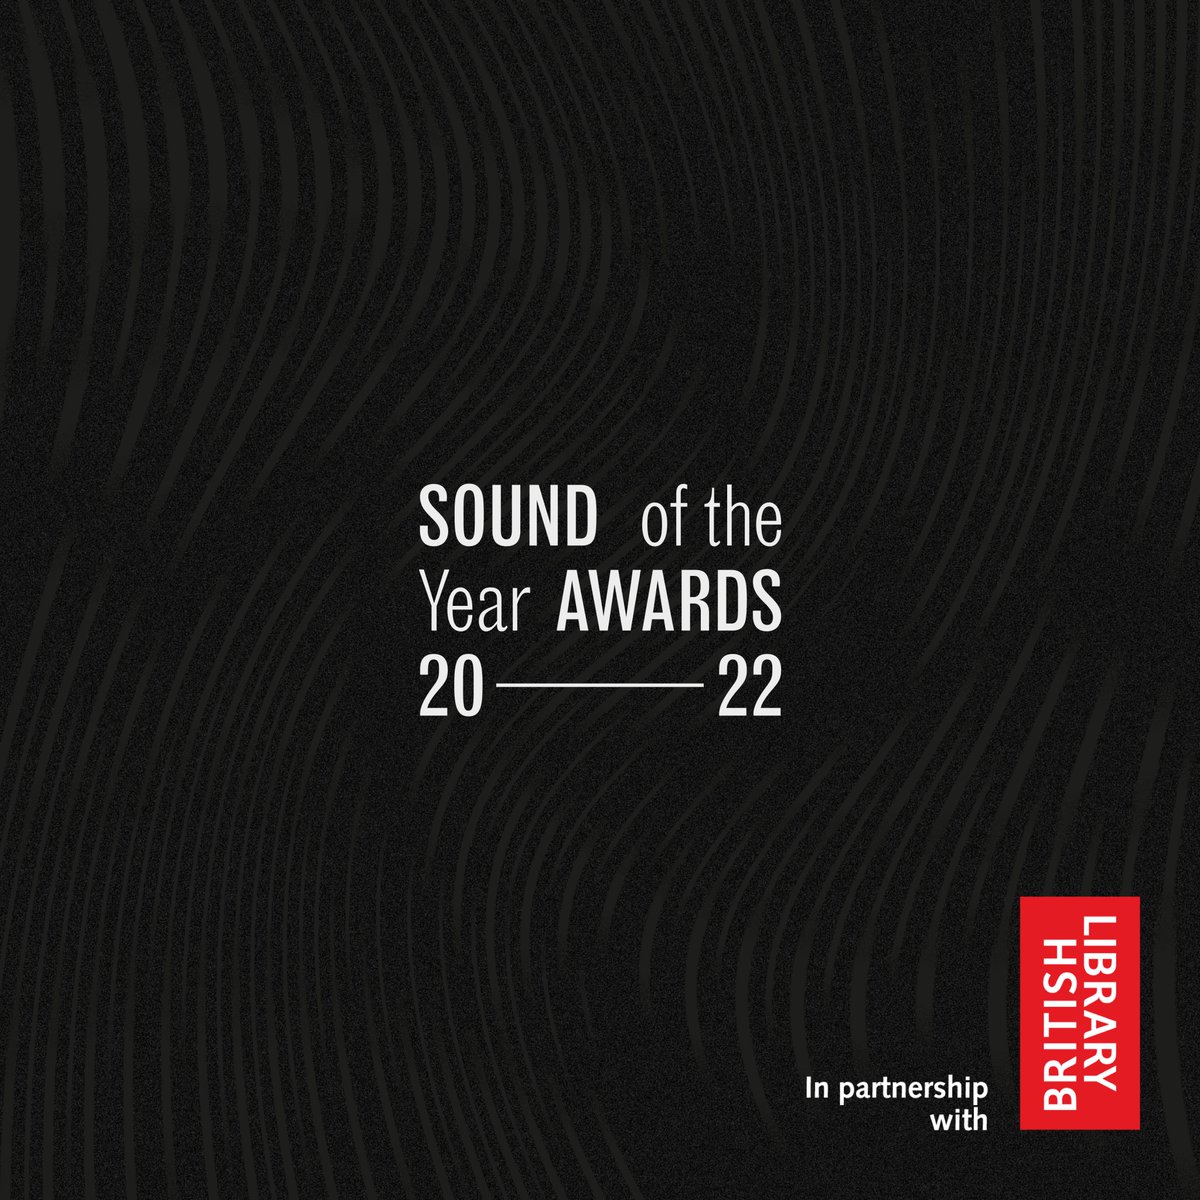 Only 2 weeks left until our evening of sound at The @BritishLibrary, where we'll reveal the Sound of the Year Awards winners and enjoy a unique performance by @AxelKacoutie! Stay tuned for updates on our special guests to be announced next week. 🎟️ bl.uk/events/sound-o…